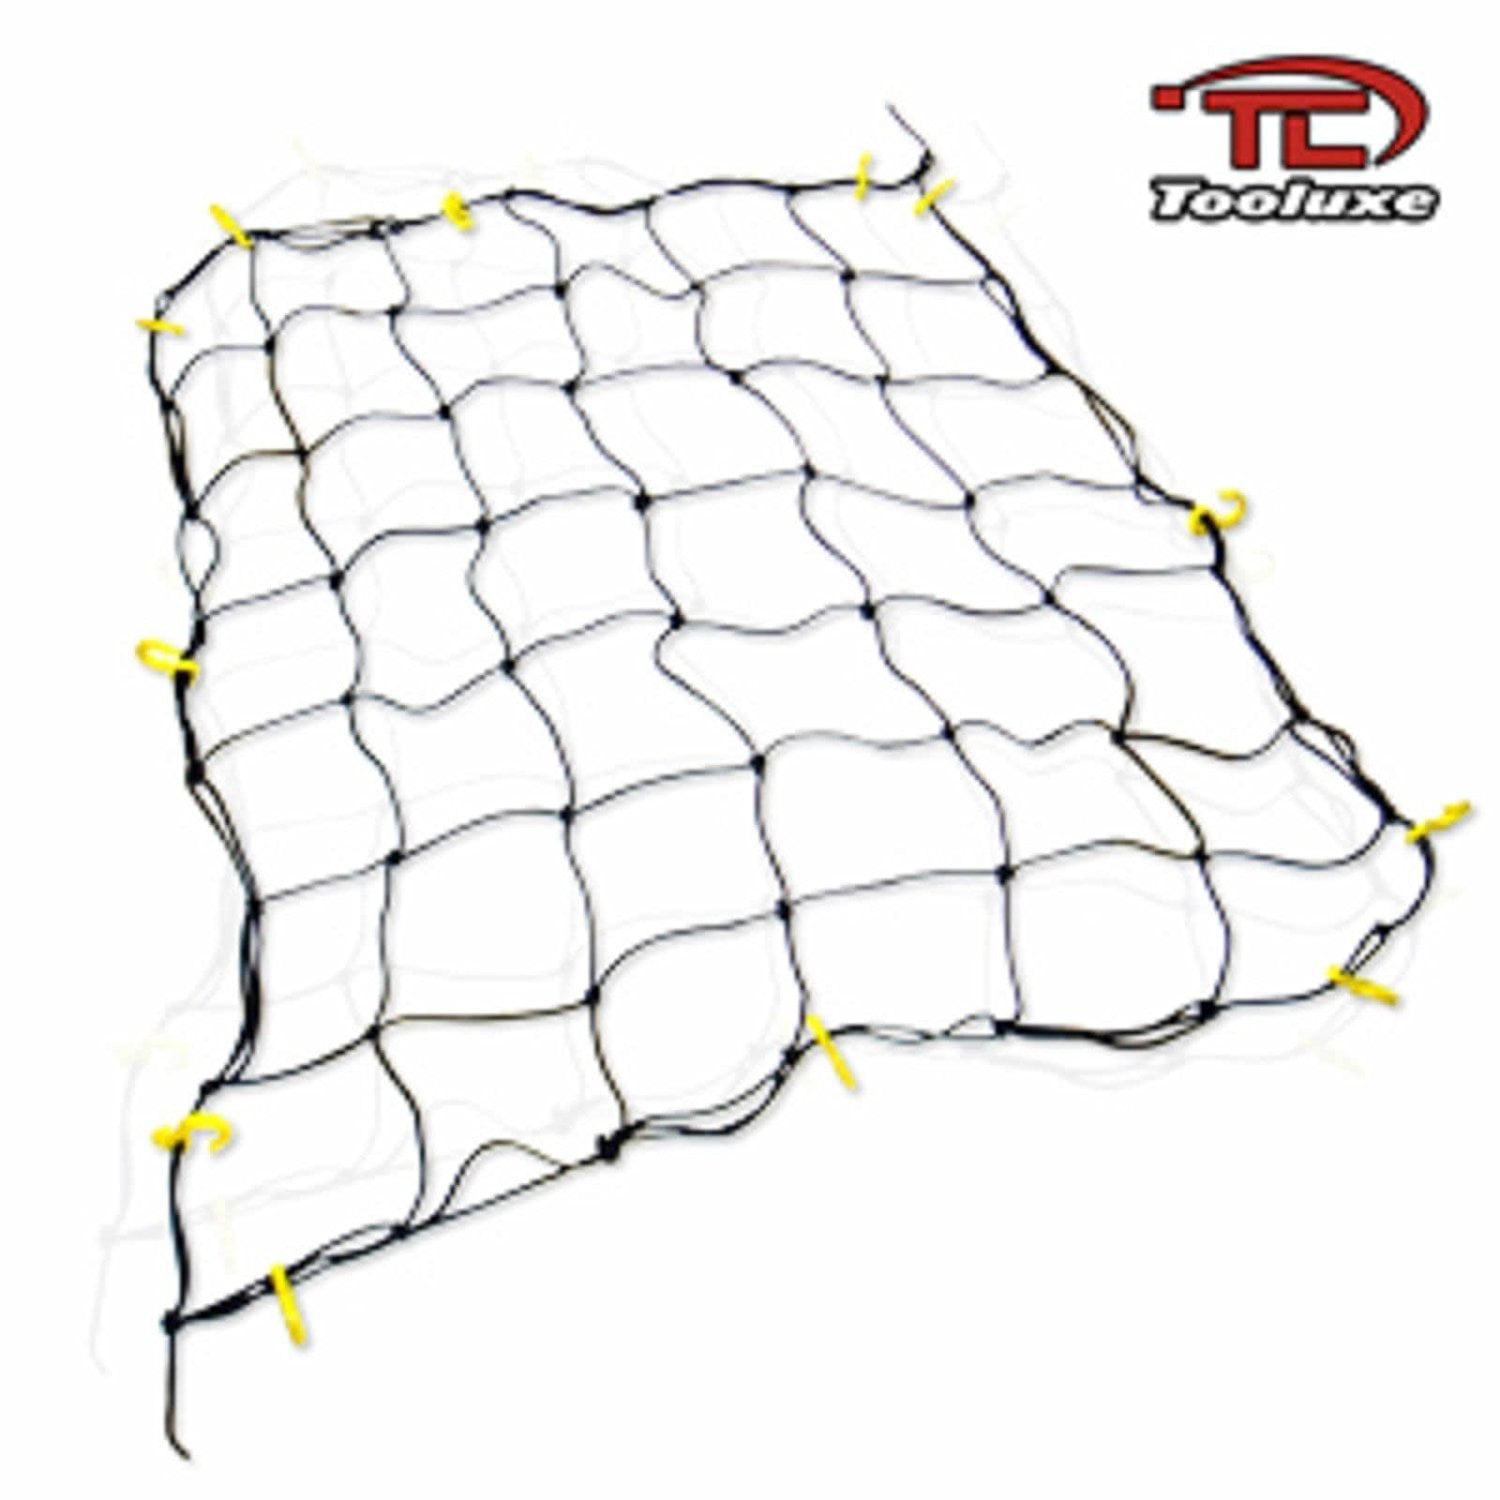 and Trucks- Free 1pcs Luggage Fixed Strap Rope KOFULL Cargo net Camping 35x47,20 x 20,12x12 Stretches to 46 x 46 Strong Stretch Heavy-Duty for Moving 